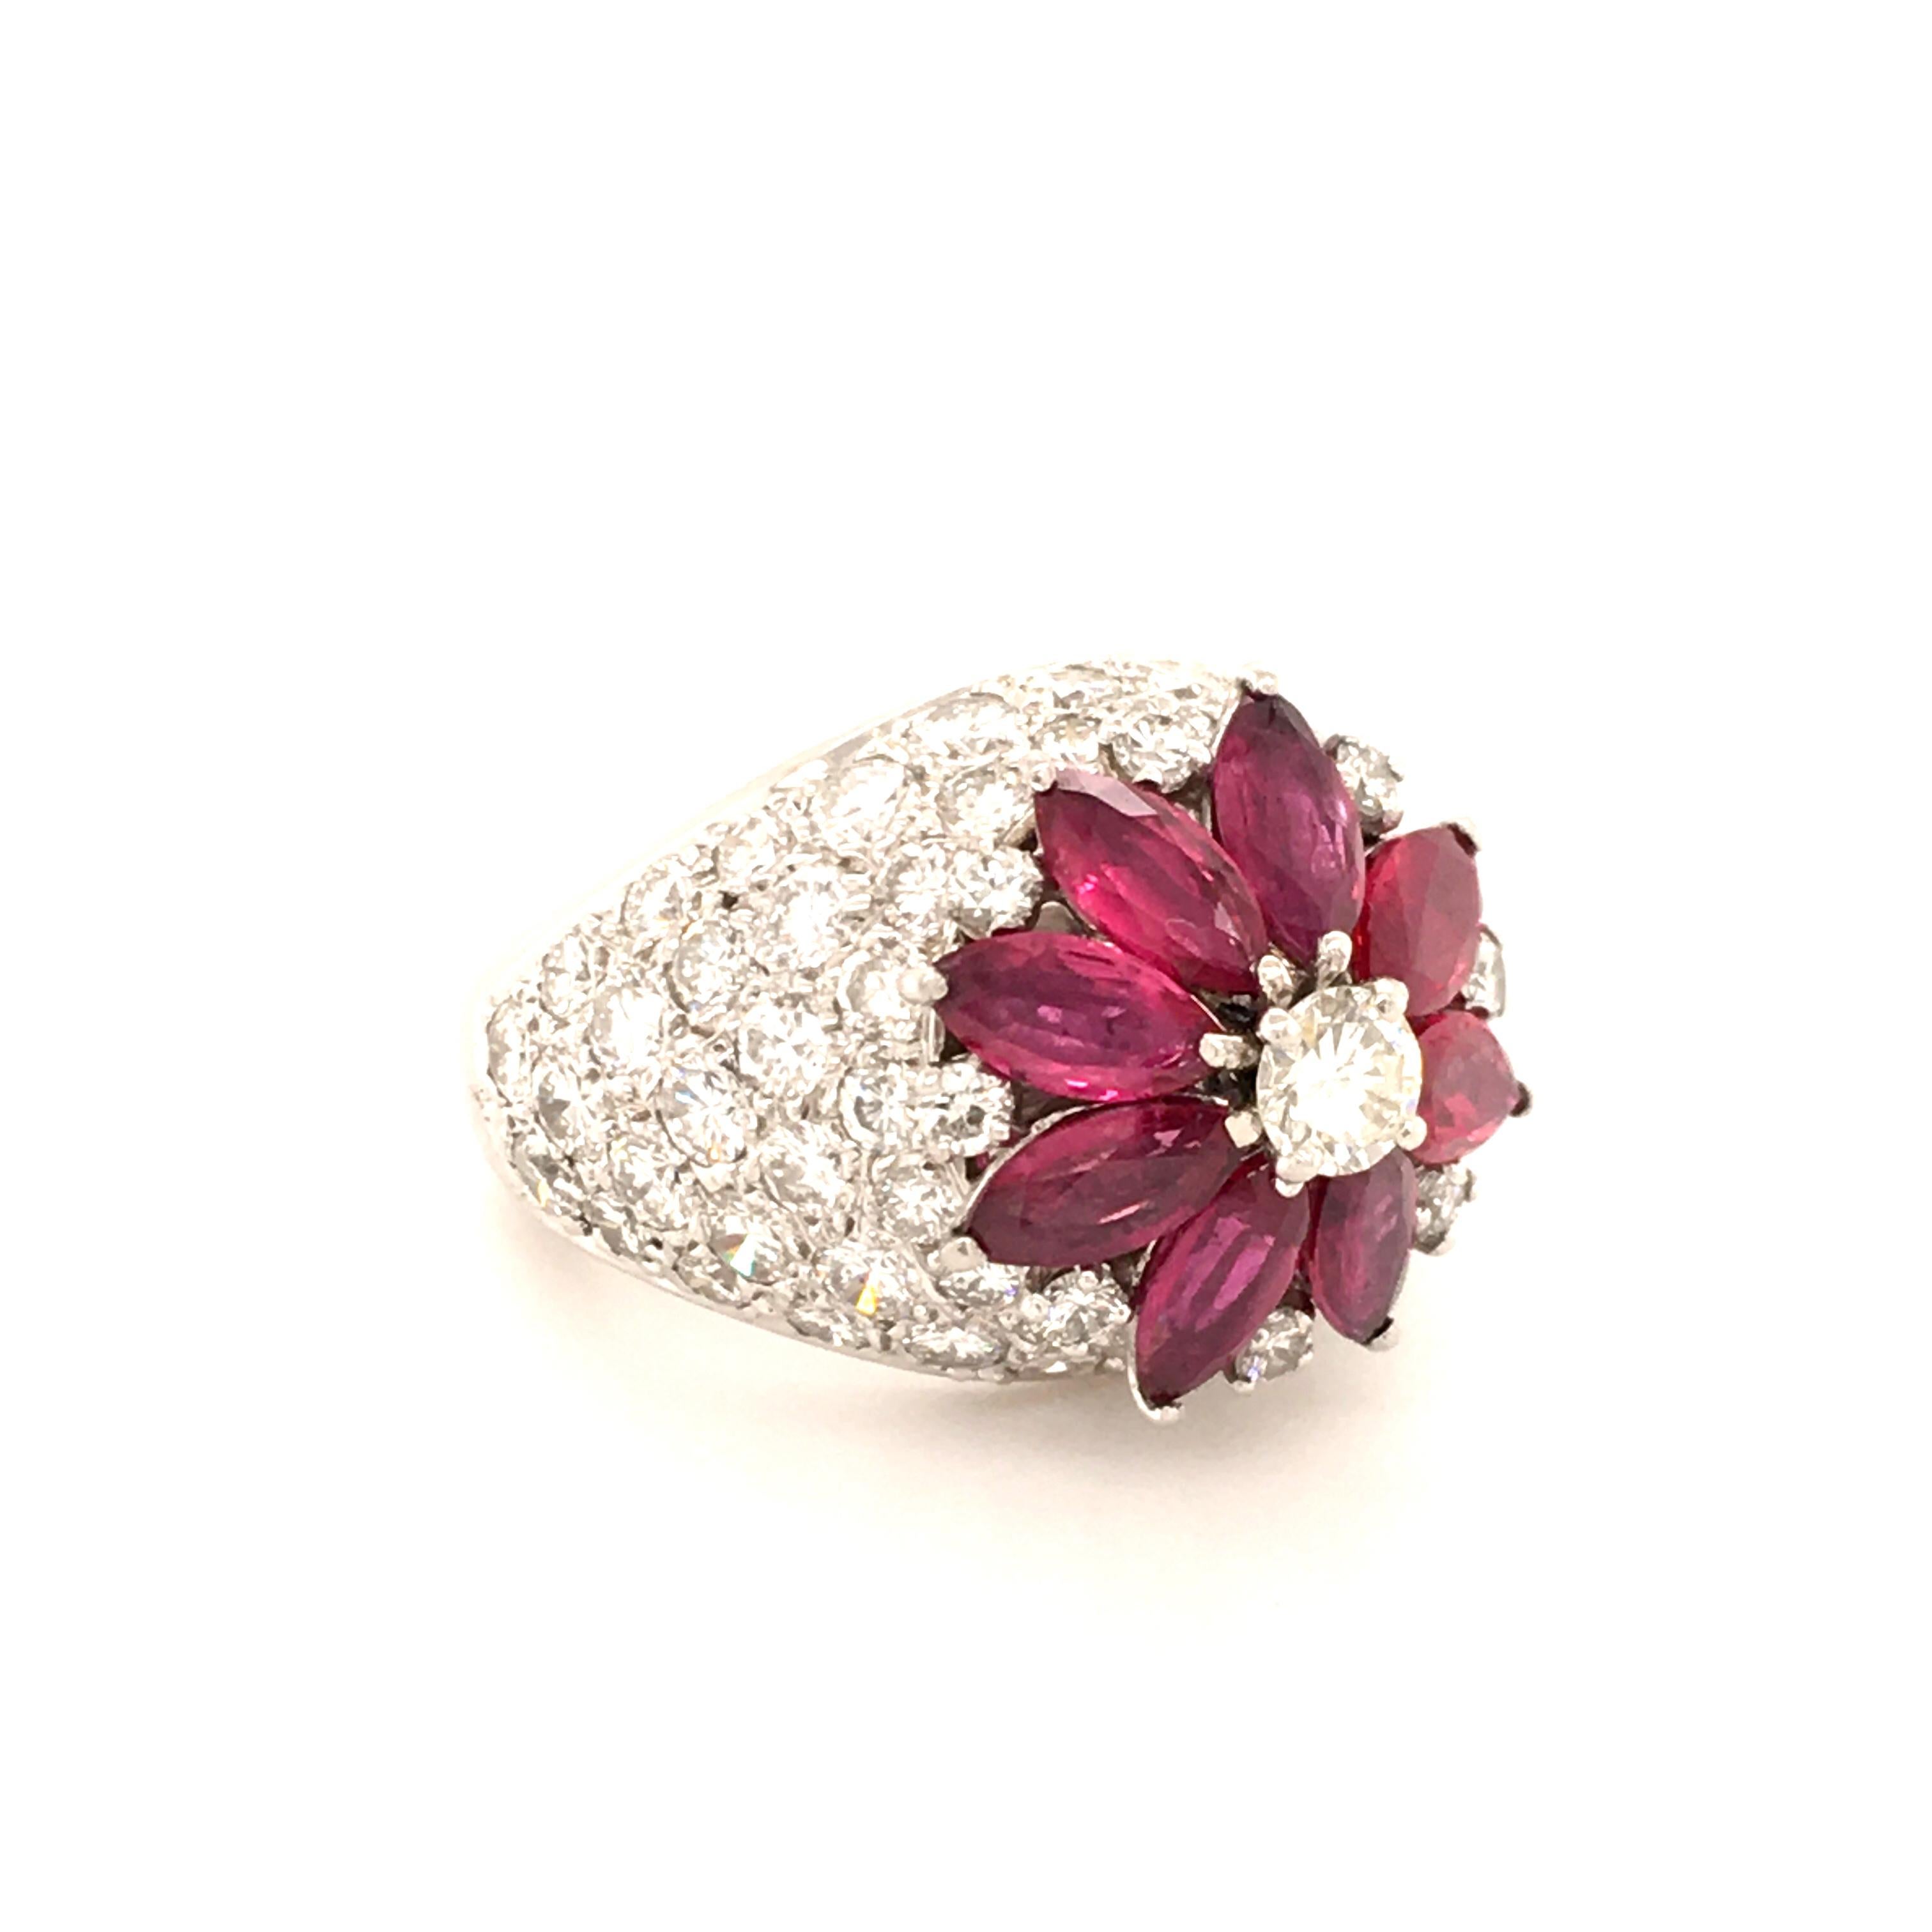 A beautiful platinum ring featuring 8 vivid red marquise shaped rubies, total weight approximately 2.80 carats. Surrounded by 73 brilliant-cut diamonds of G and H color and vs clarity, total weight approximately 3.27 carats.

Size: 51 / US 6